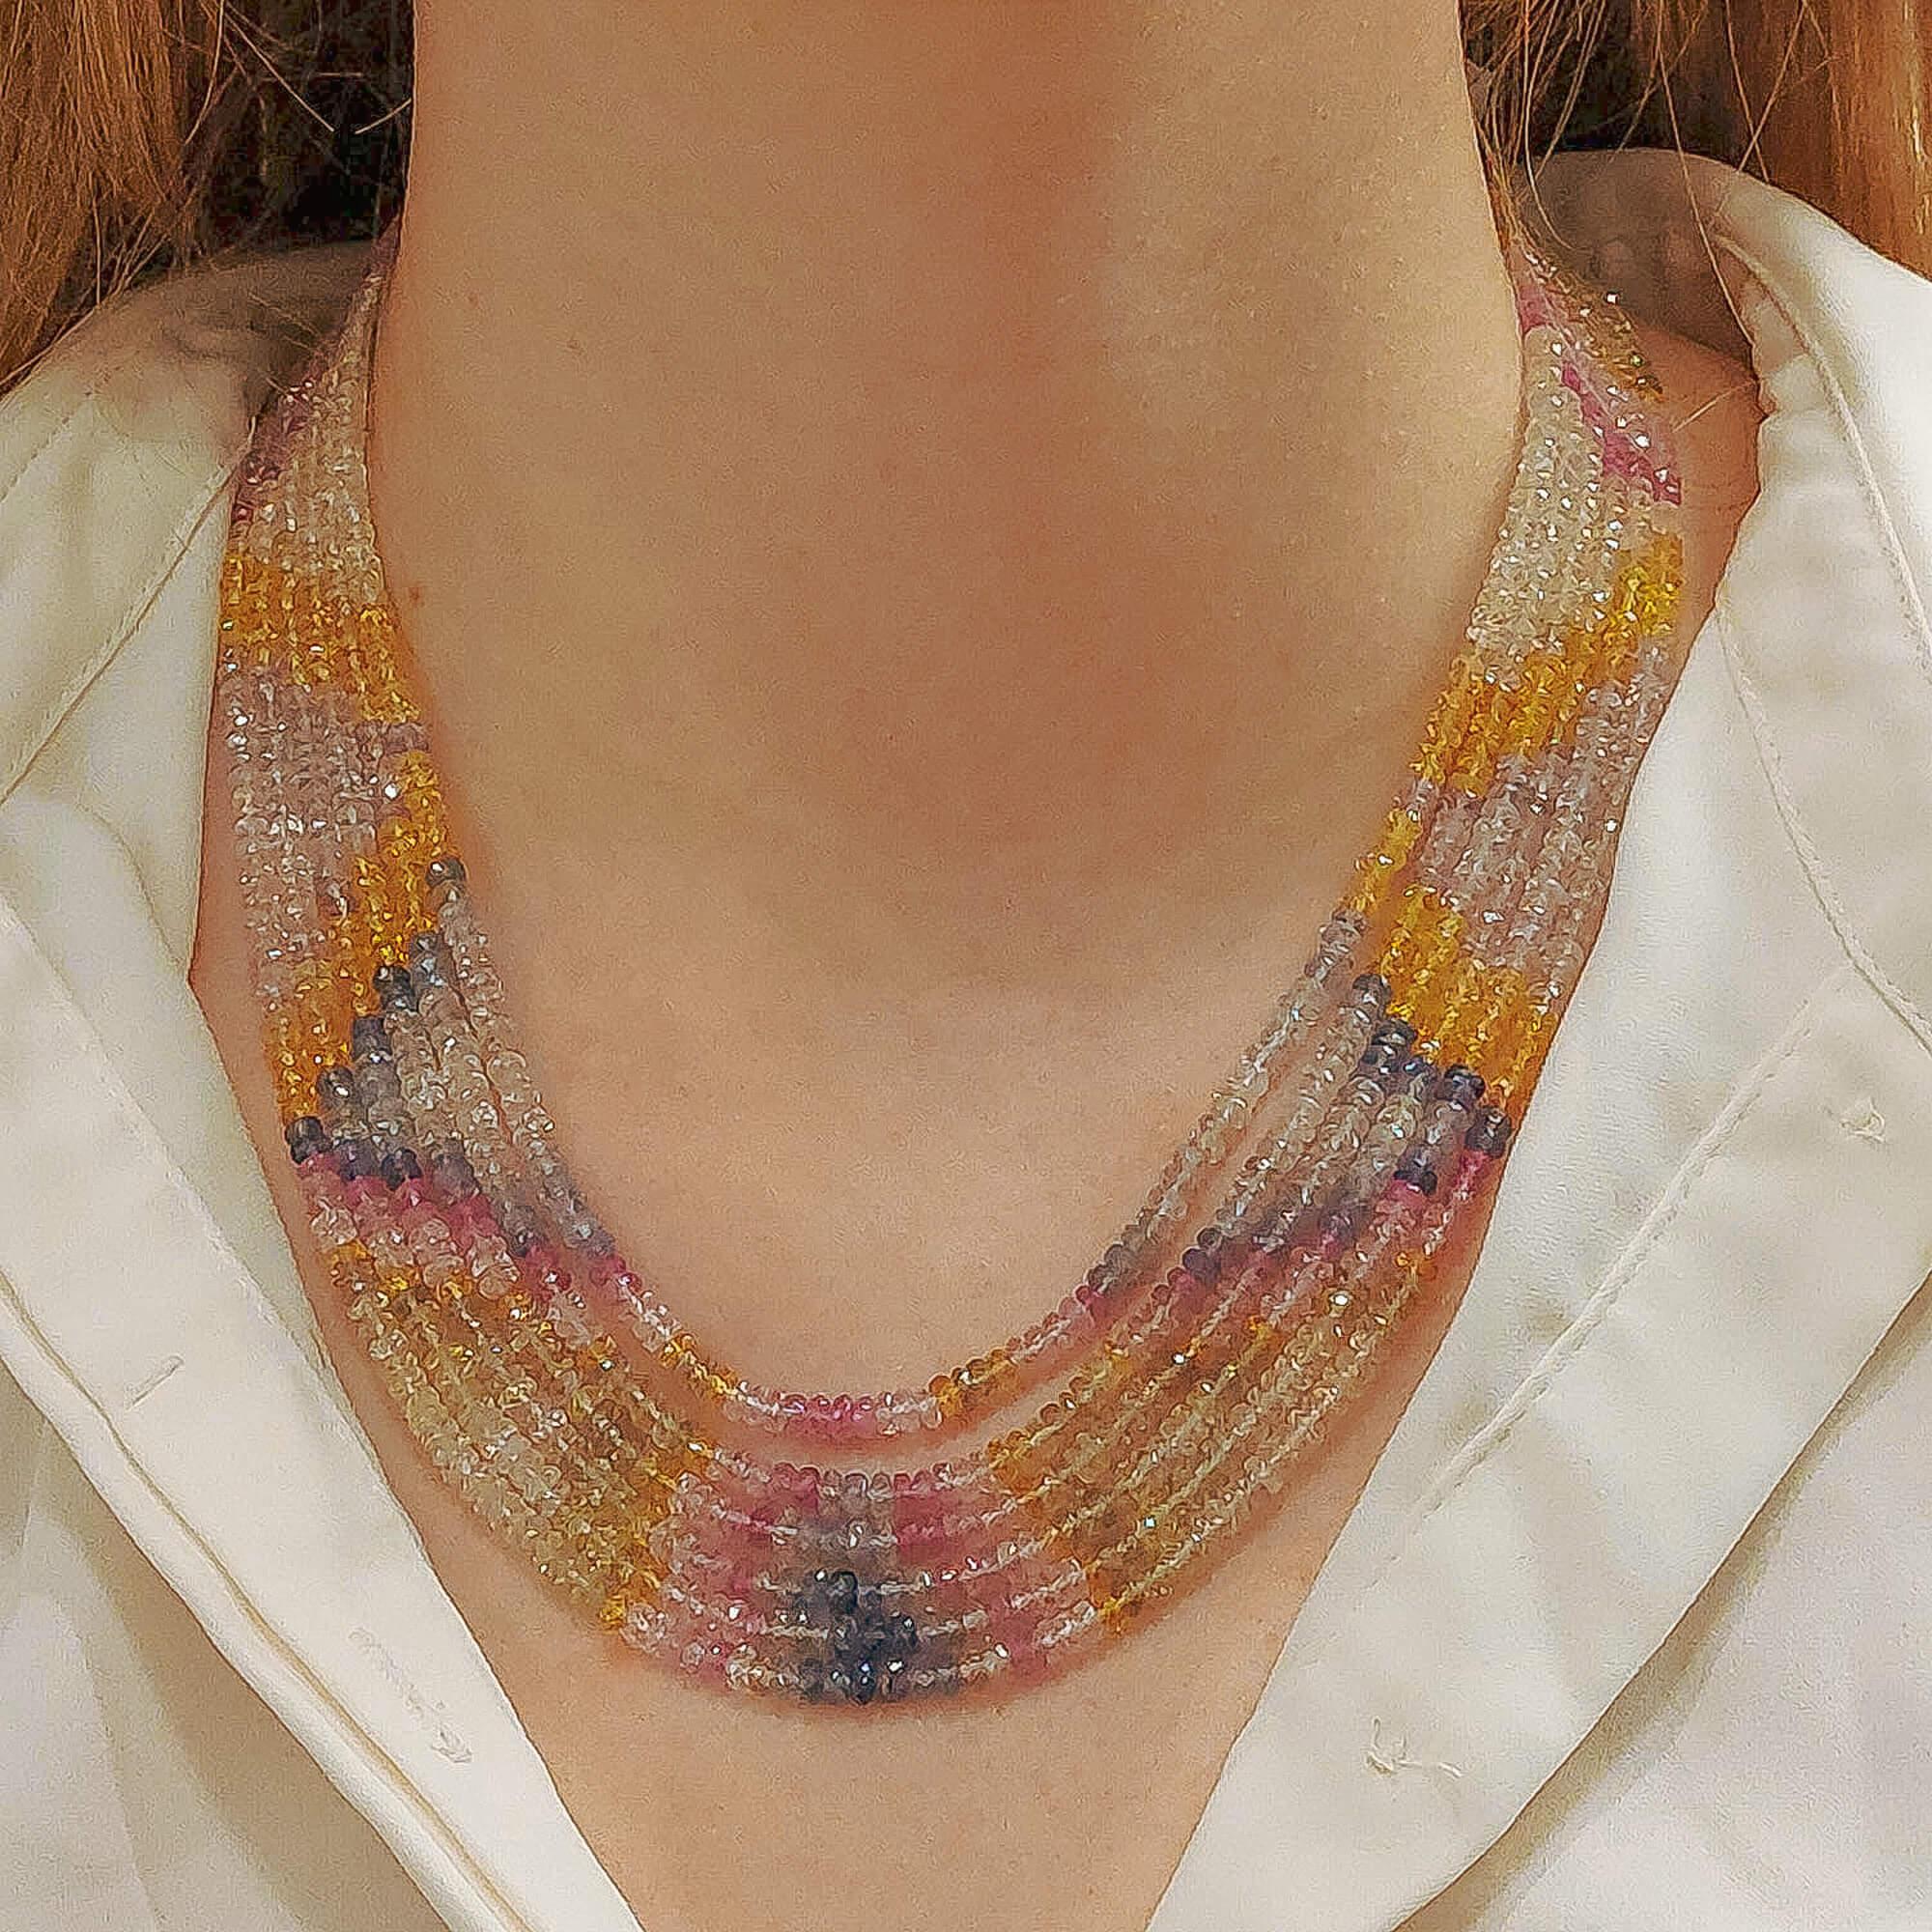 Beaded Pastel Rainbow Sapphire Strand Necklace with 9 Karat Gold Clasp In Good Condition For Sale In London, GB